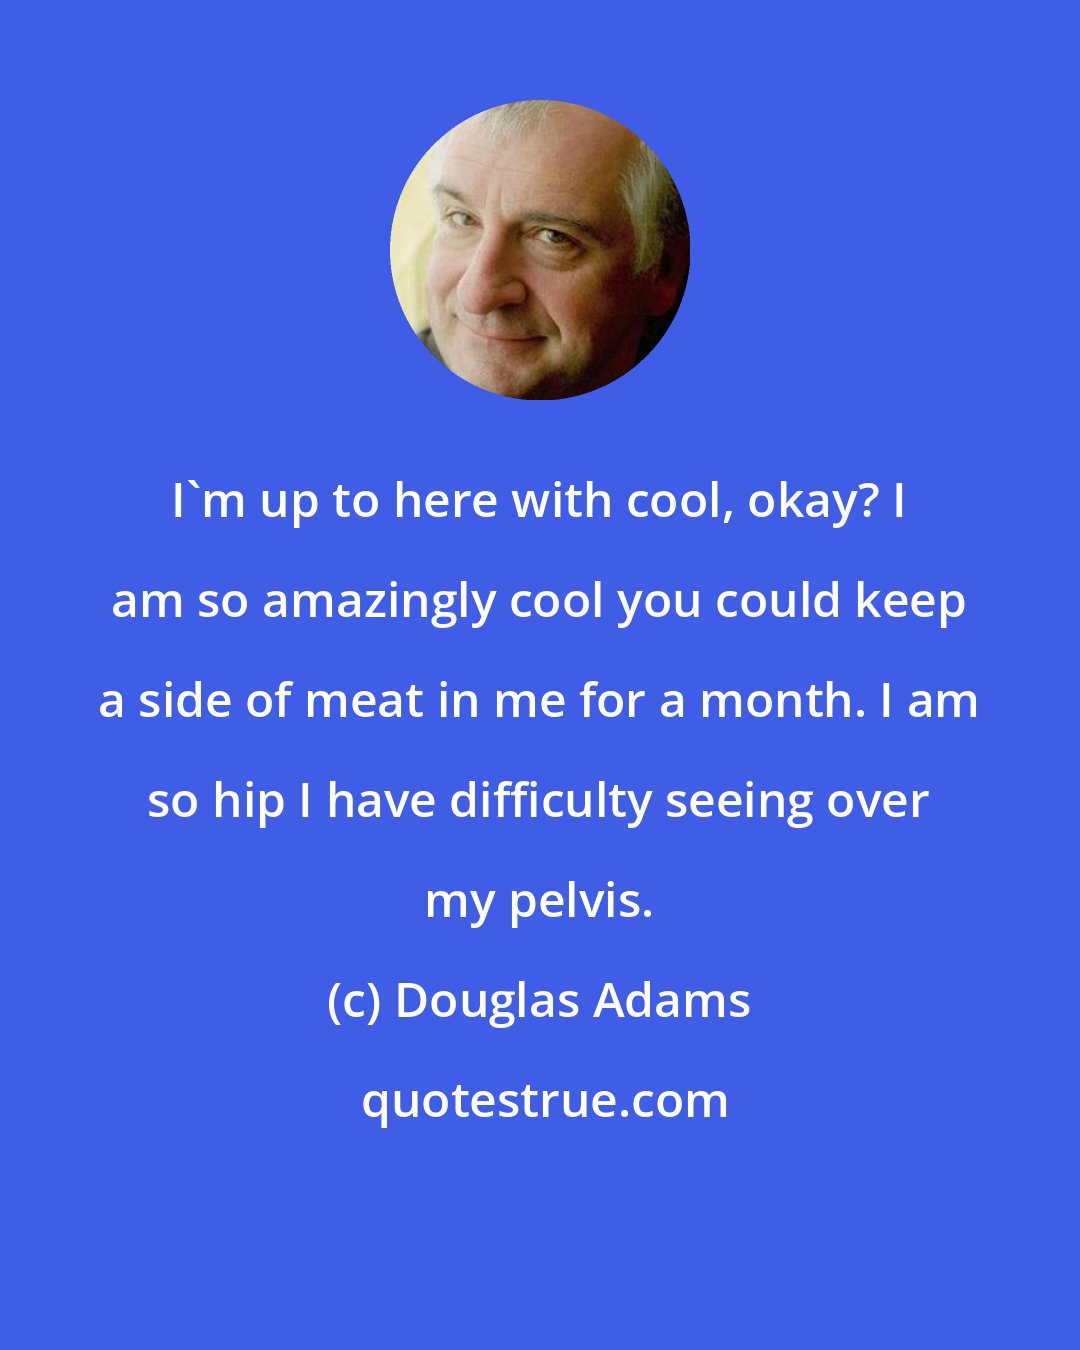 Douglas Adams: I'm up to here with cool, okay? I am so amazingly cool you could keep a side of meat in me for a month. I am so hip I have difficulty seeing over my pelvis.